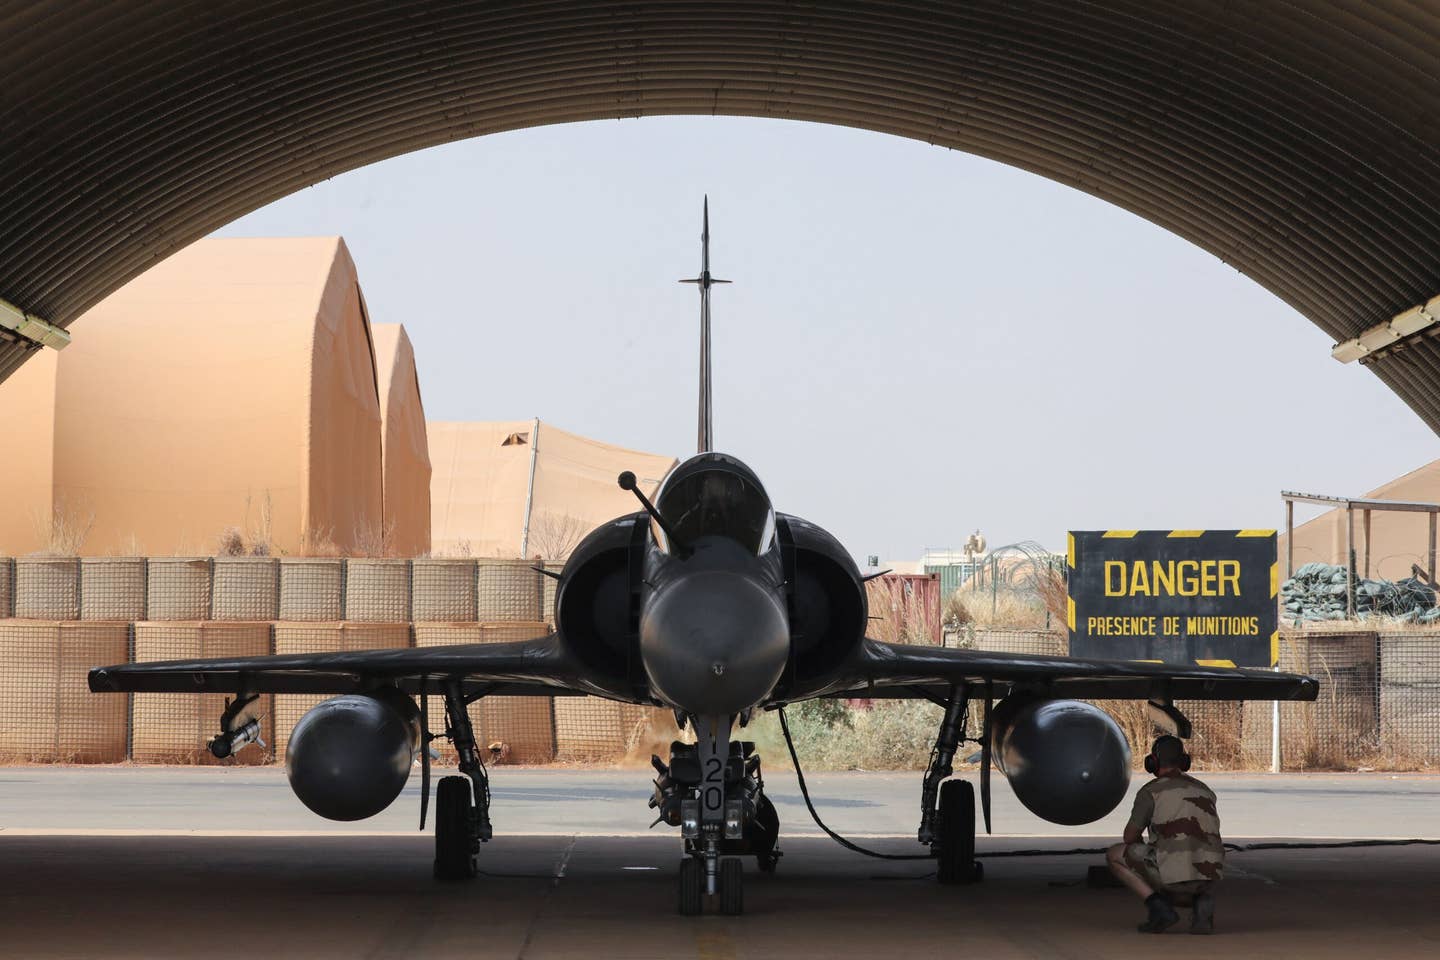 A technician works on a Mirage 2000C before it launches from the Niamey Air Base, Niger, in December 2017, to participate in a Barkhane mission in the Sahel region. <em>Photo by LUDOVIC MARIN/AFP via Getty Images</em>